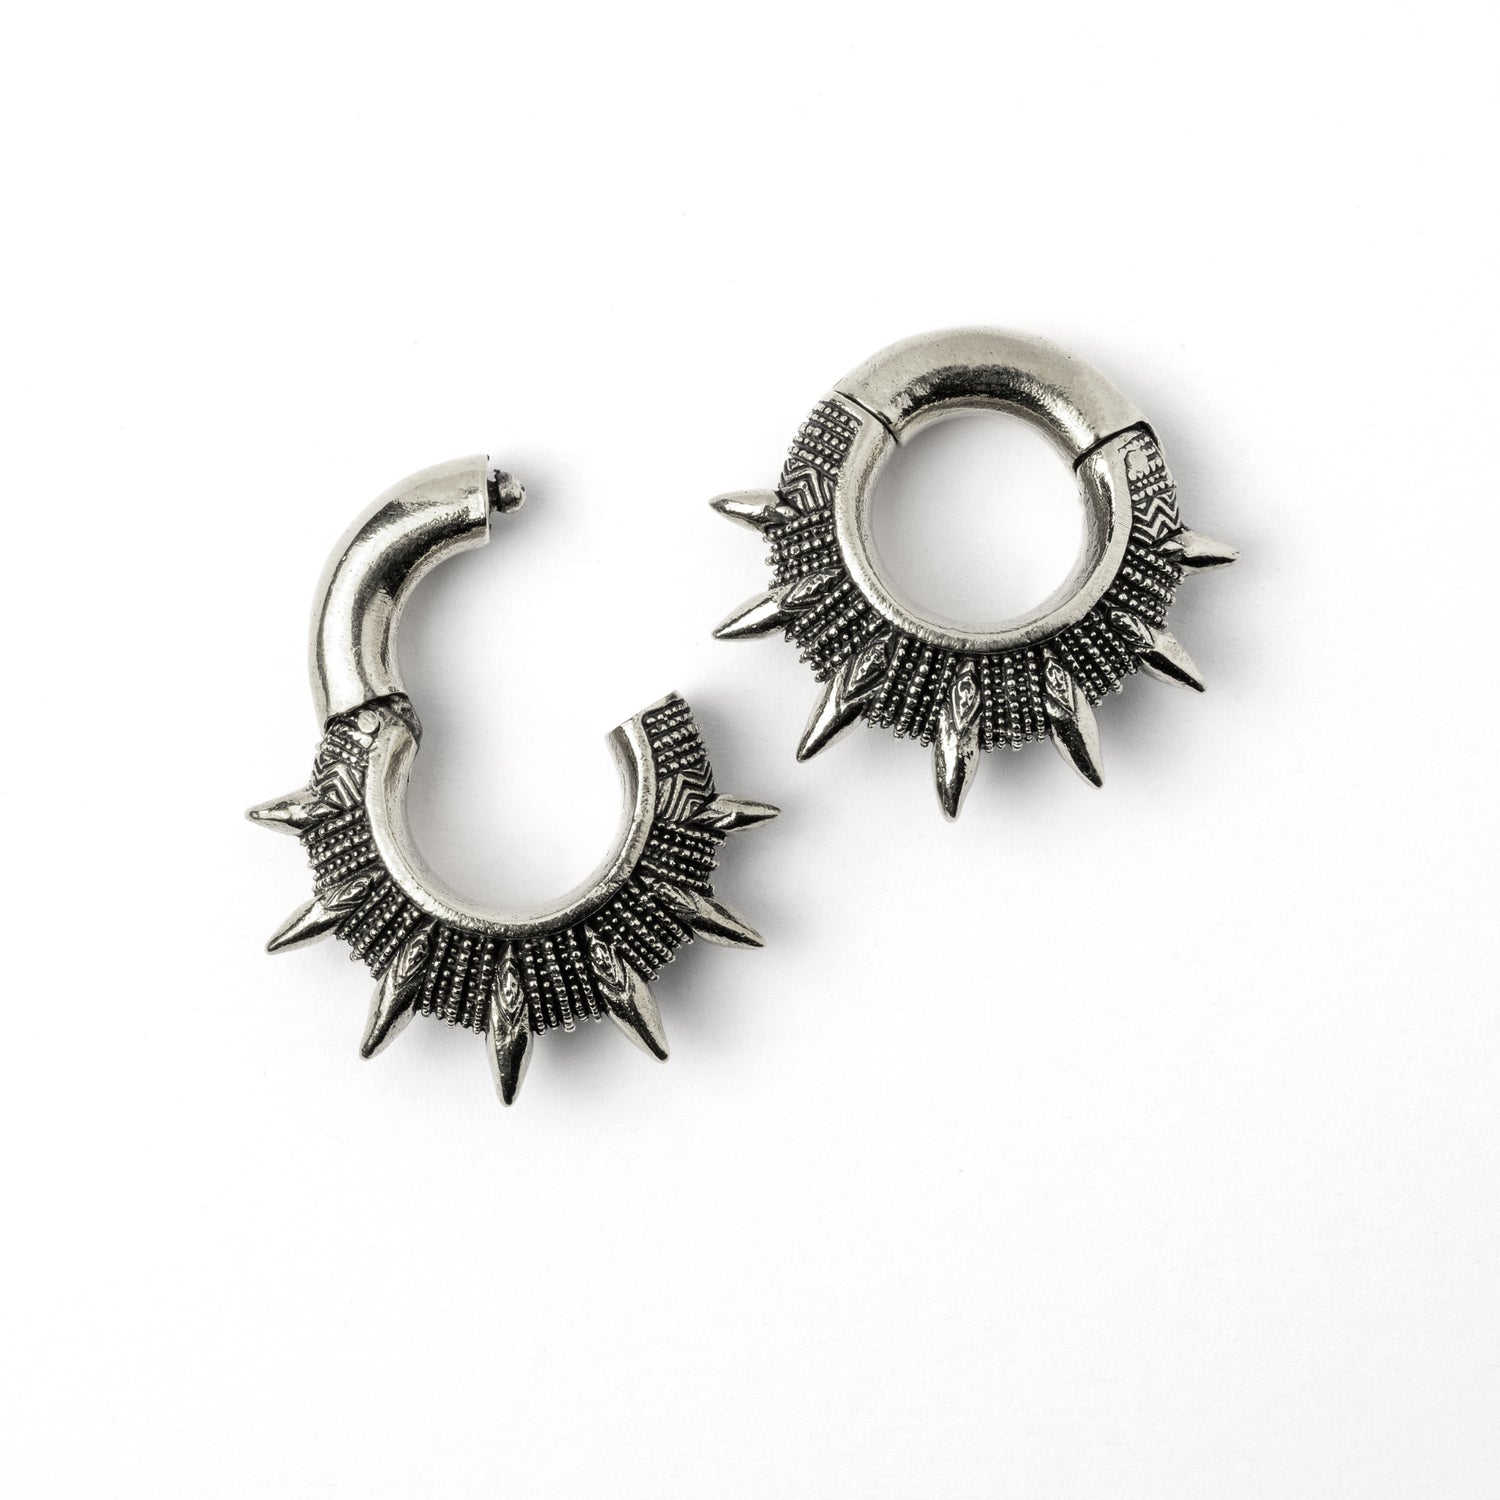 pair of silver colour spiky ear weights hoops